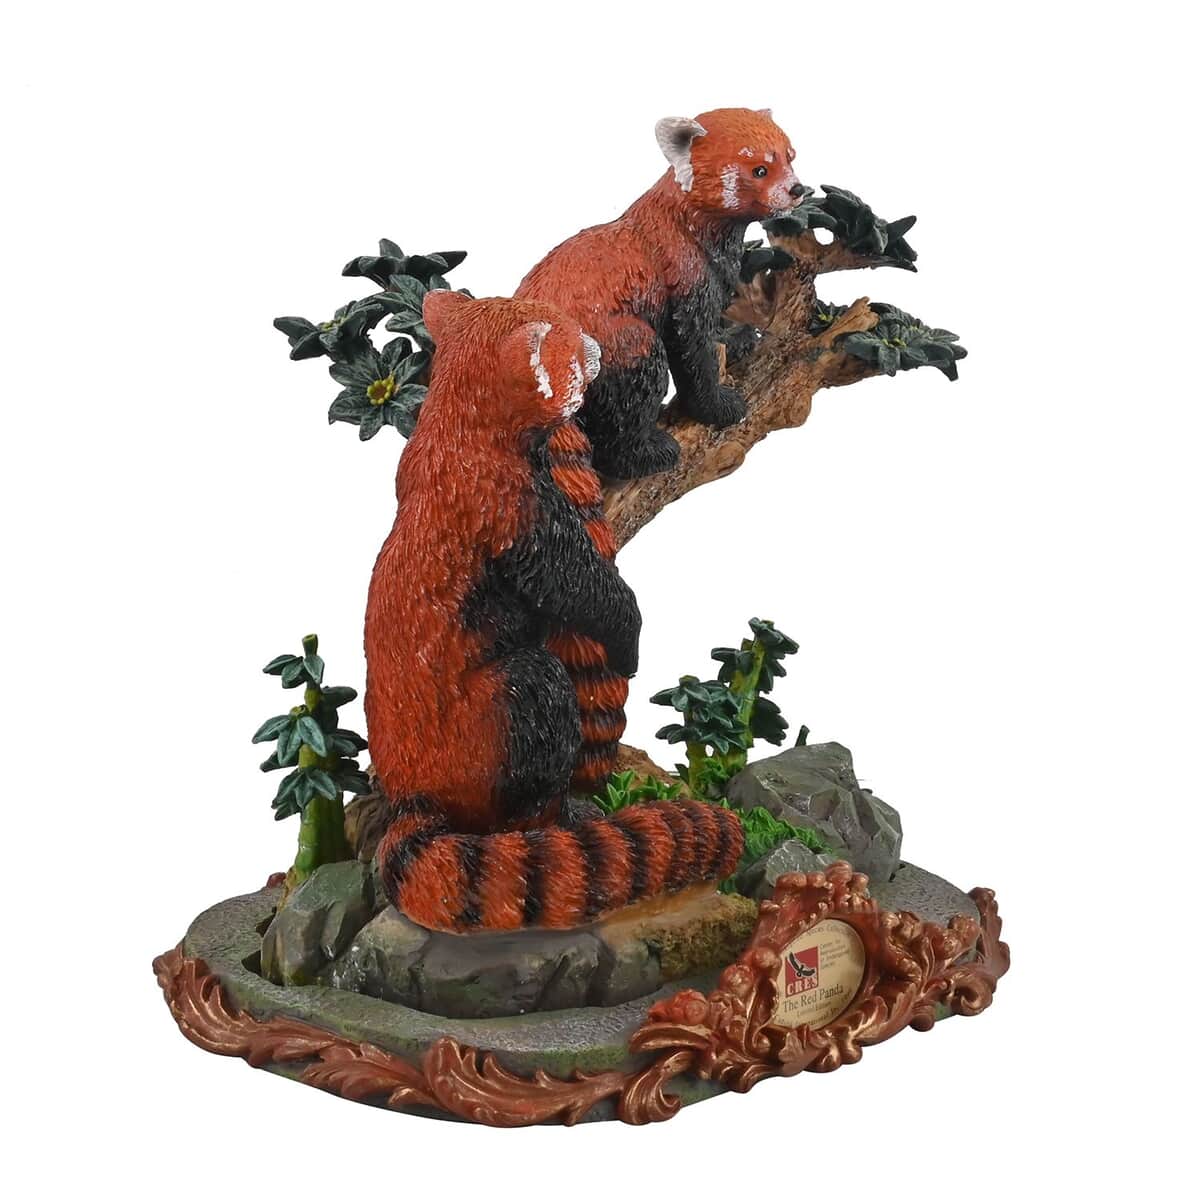 Figurine with Stand - Red Panda (8.75"x6.25"x9") image number 4